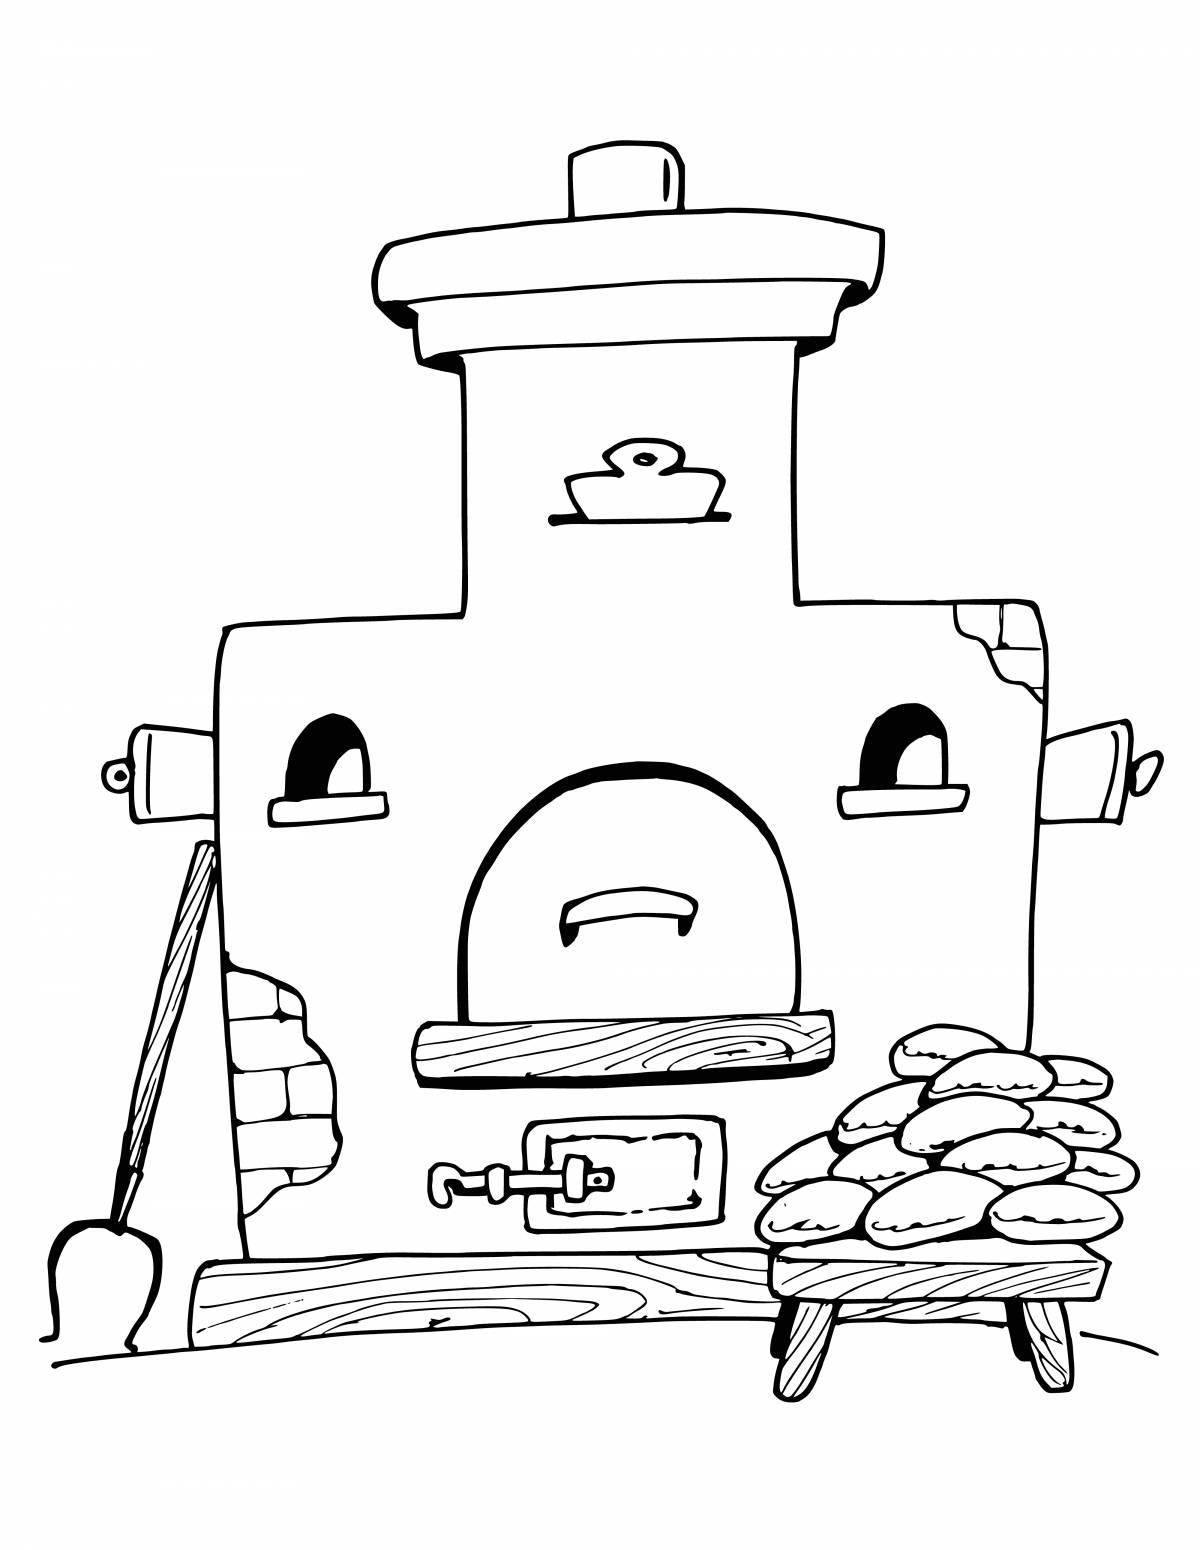 Coloring book quiet oven